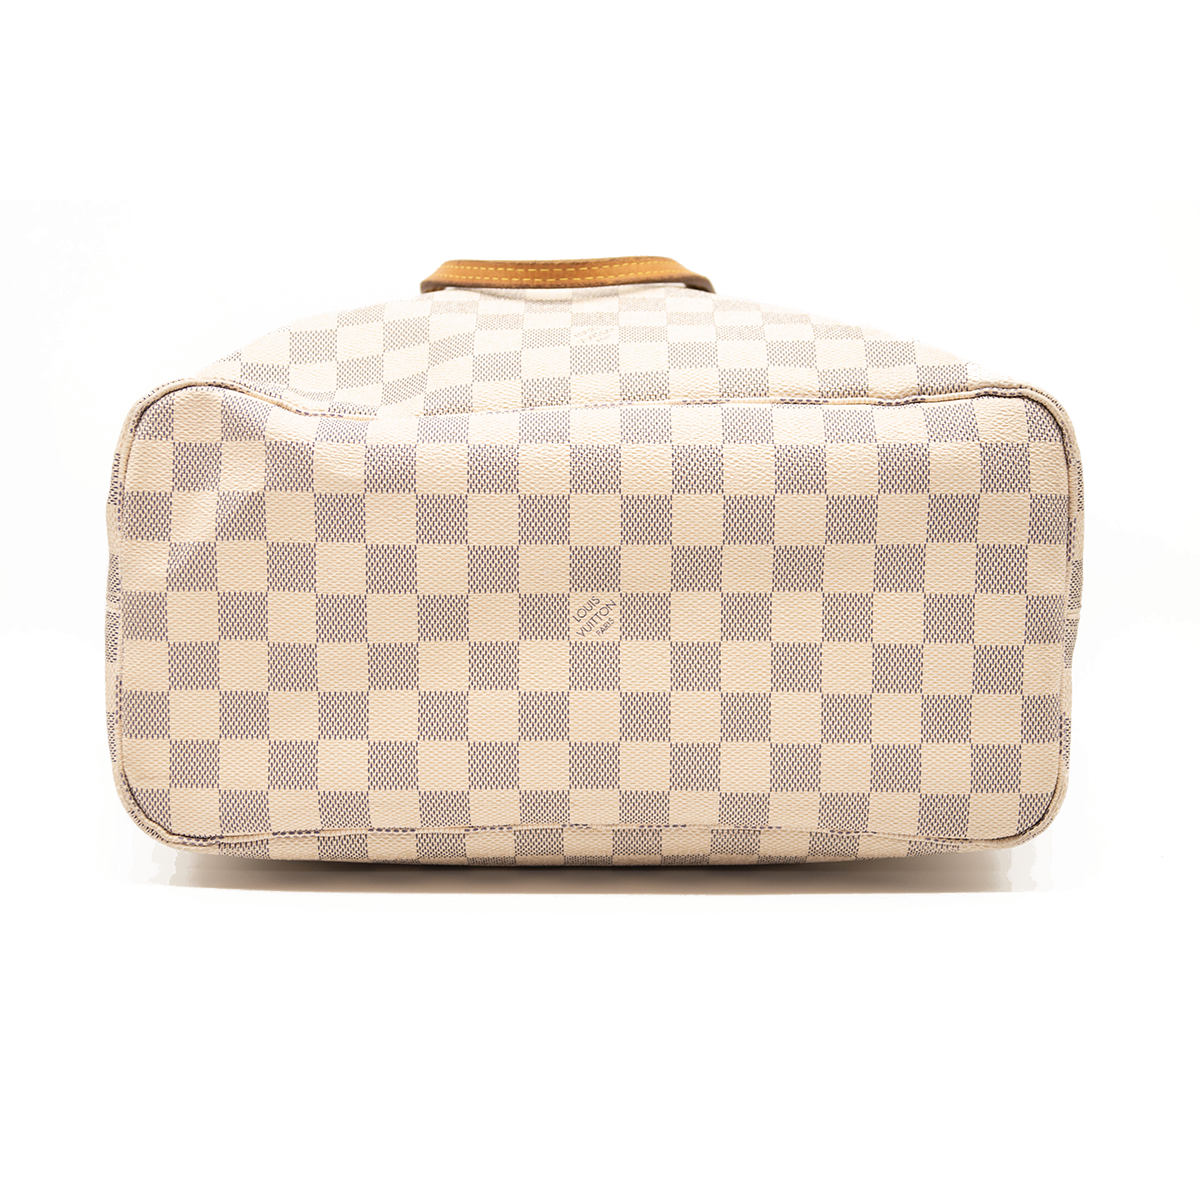 Pre-owned Louis Vuitton Blue/white Damier Azur Neverfull Pm